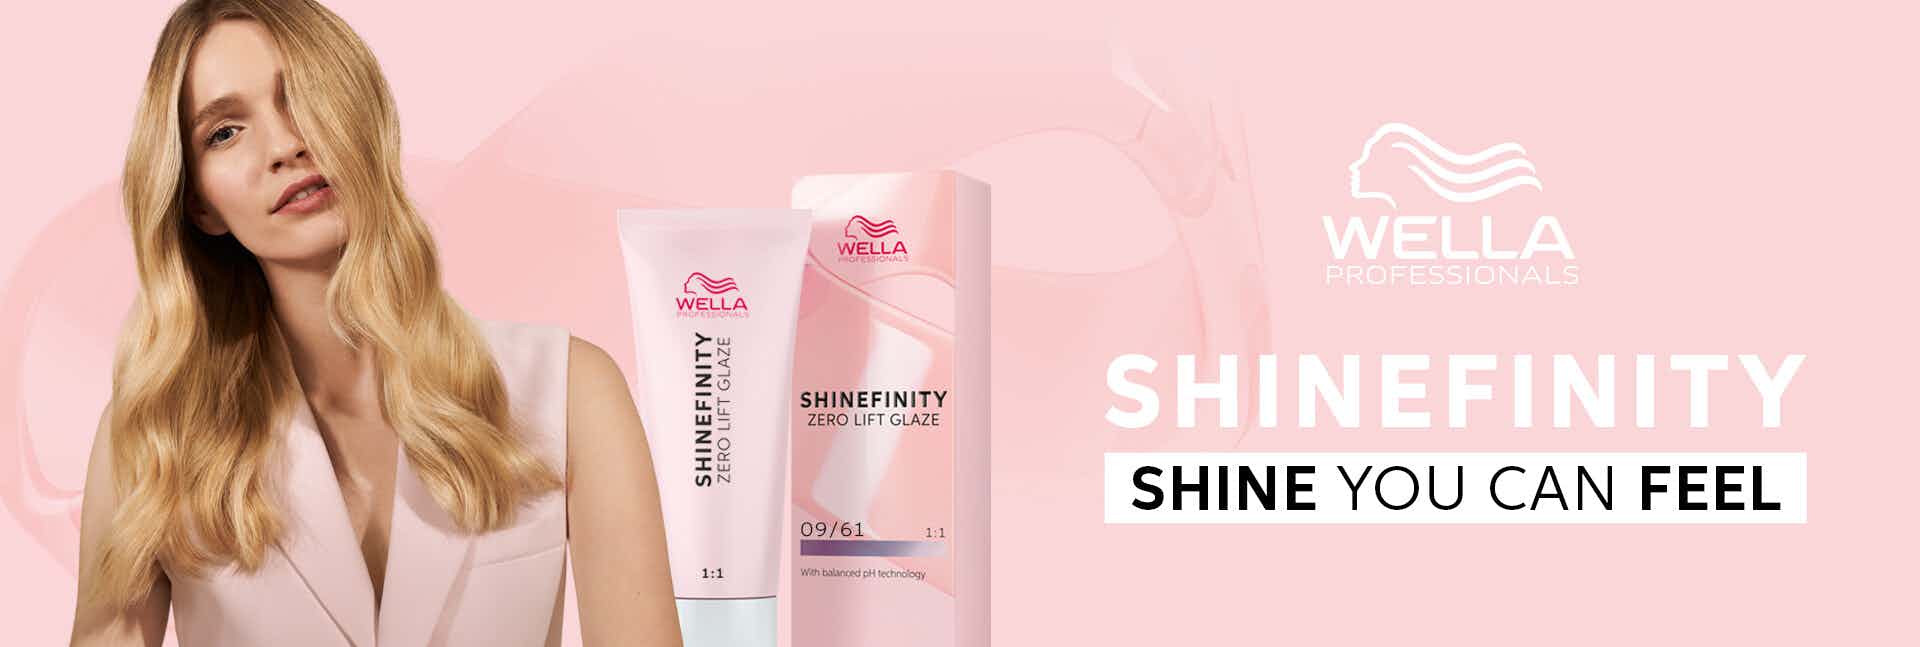 Shinefinity: Long-lasting color glaze with ZERO lift and ZERO damage, staying true-to-tone even on porous hair